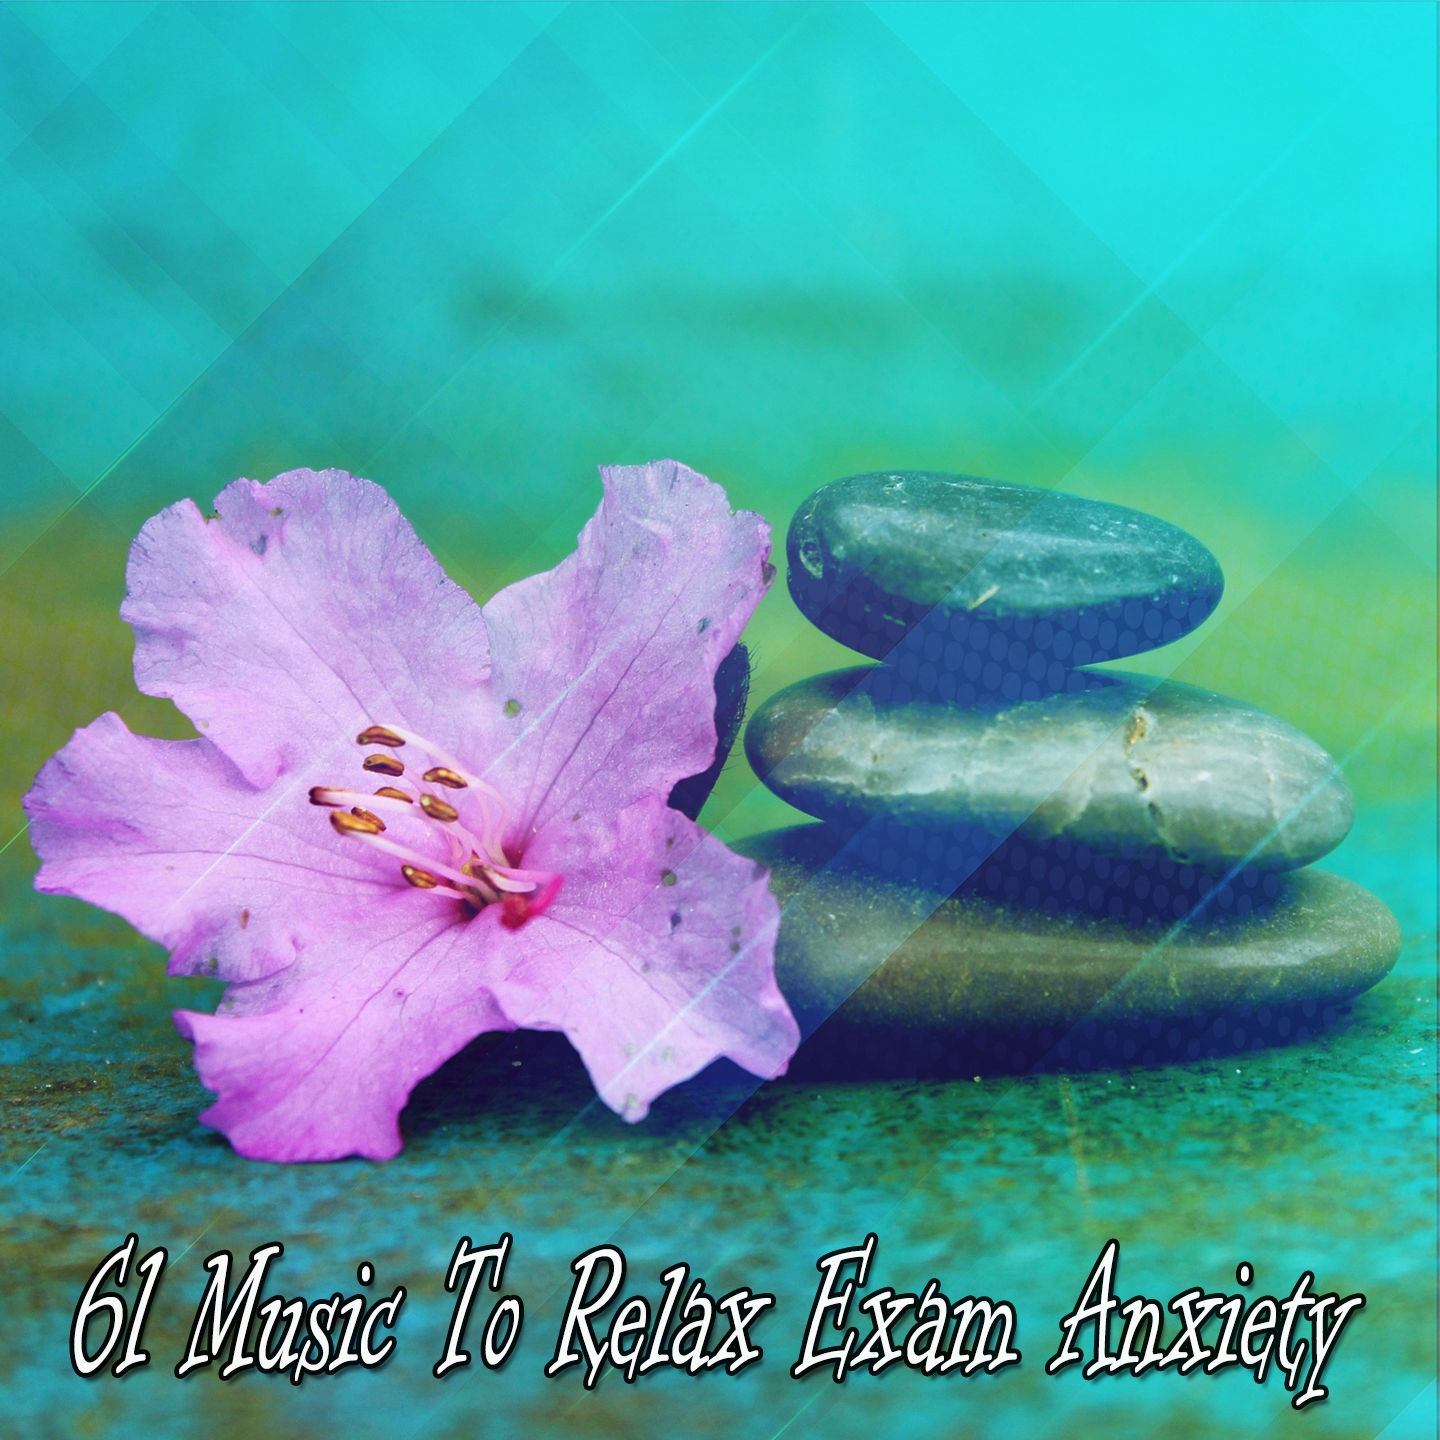 61 Music To Relax Exam Anxiety